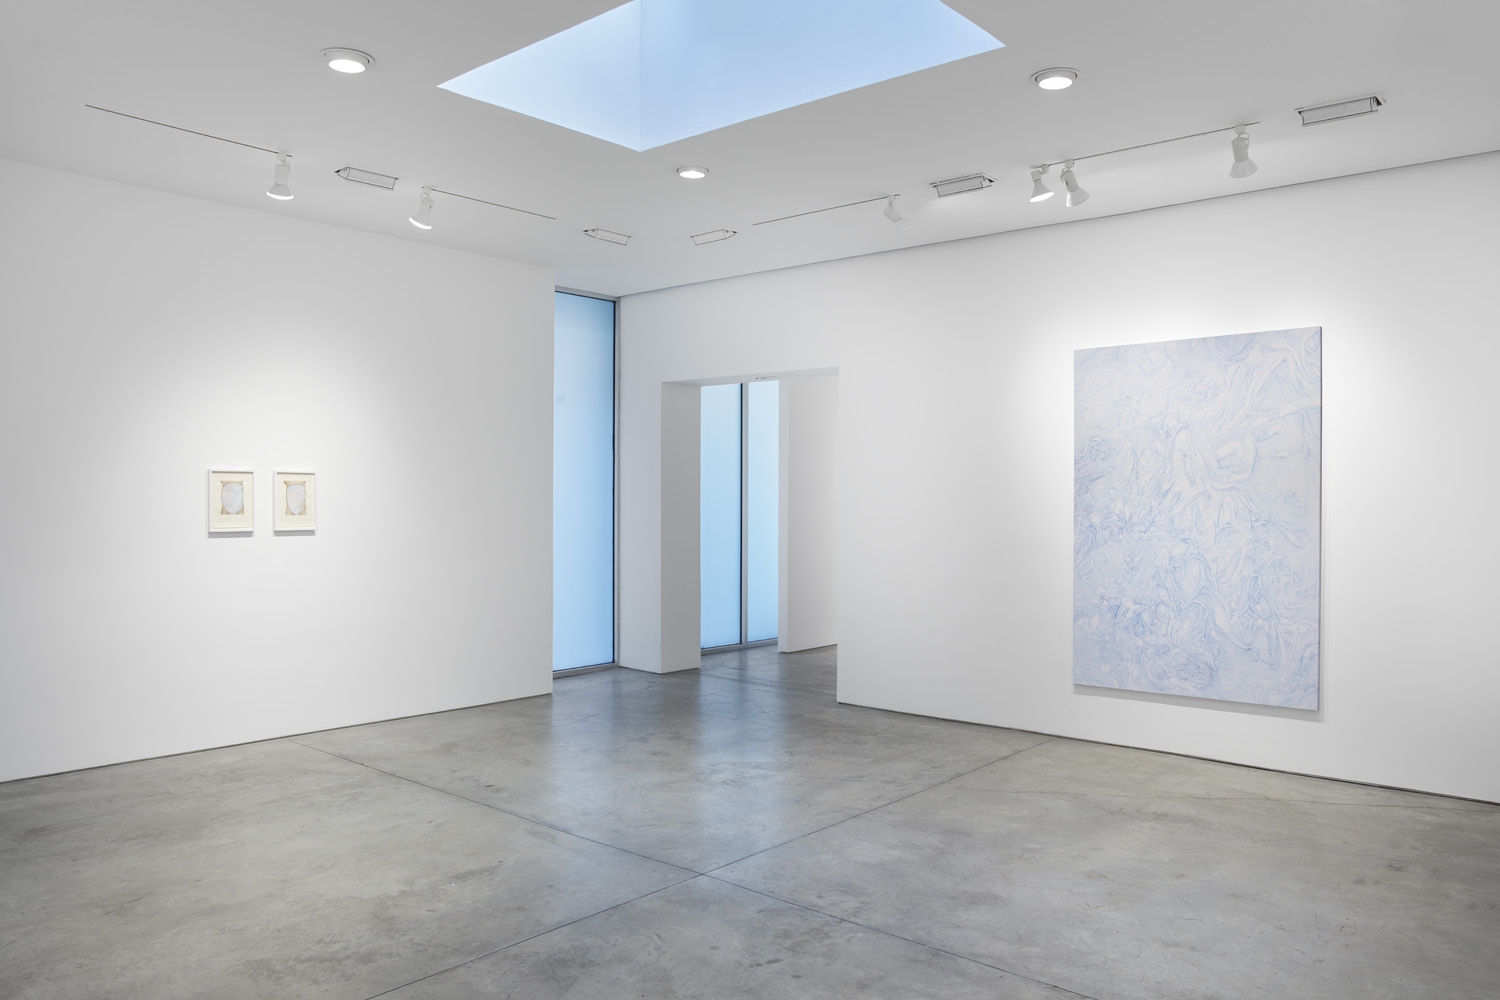 Mandy El-Sayegh,&nbsp;MUTATIONS IN BLUE, WHITE AND RED, Installation view at Lehmann Maupin, New York